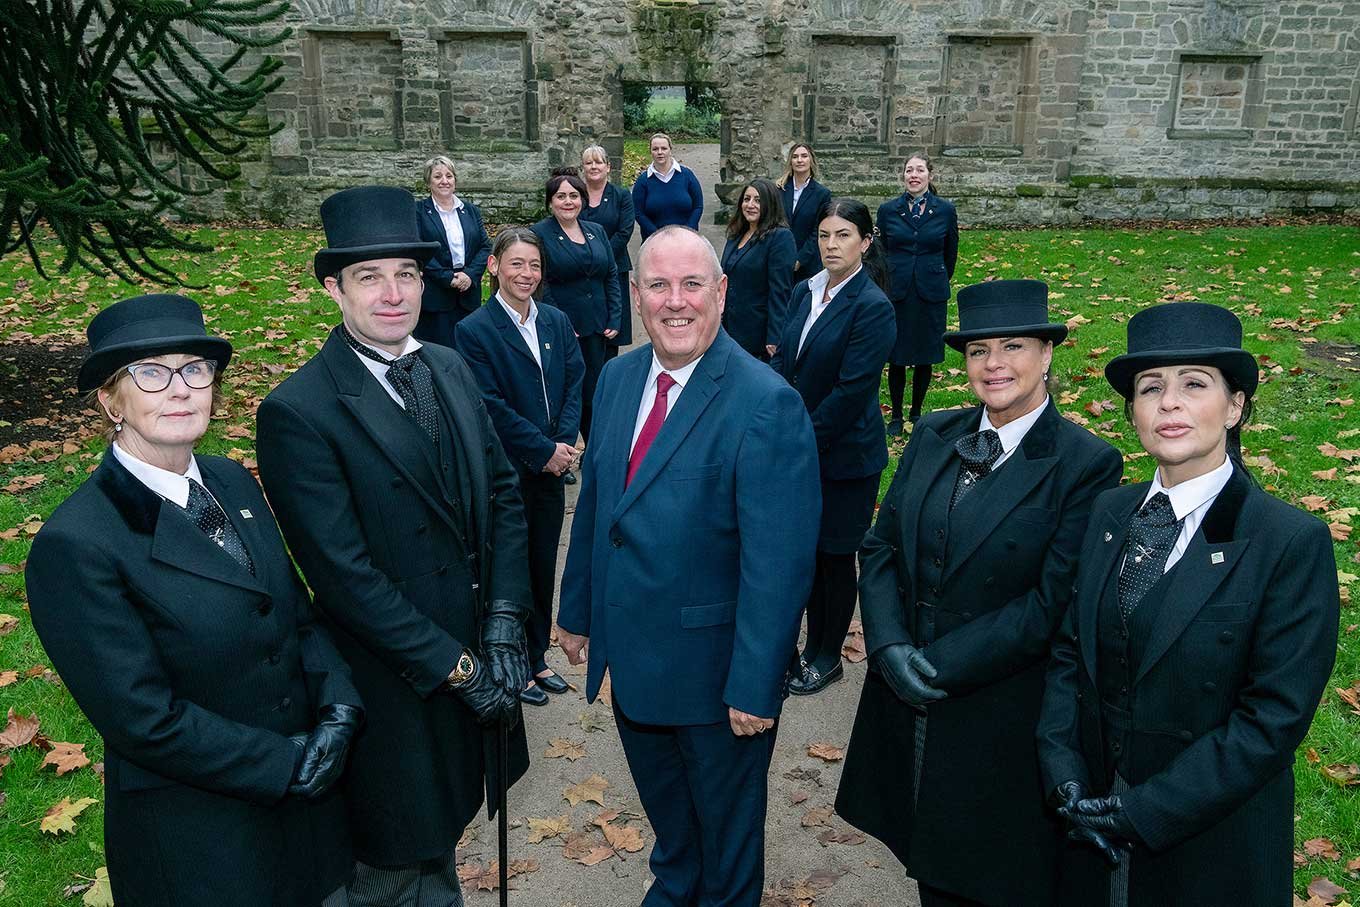 Funeral directors and arrangers wearing traditional outfits stand together